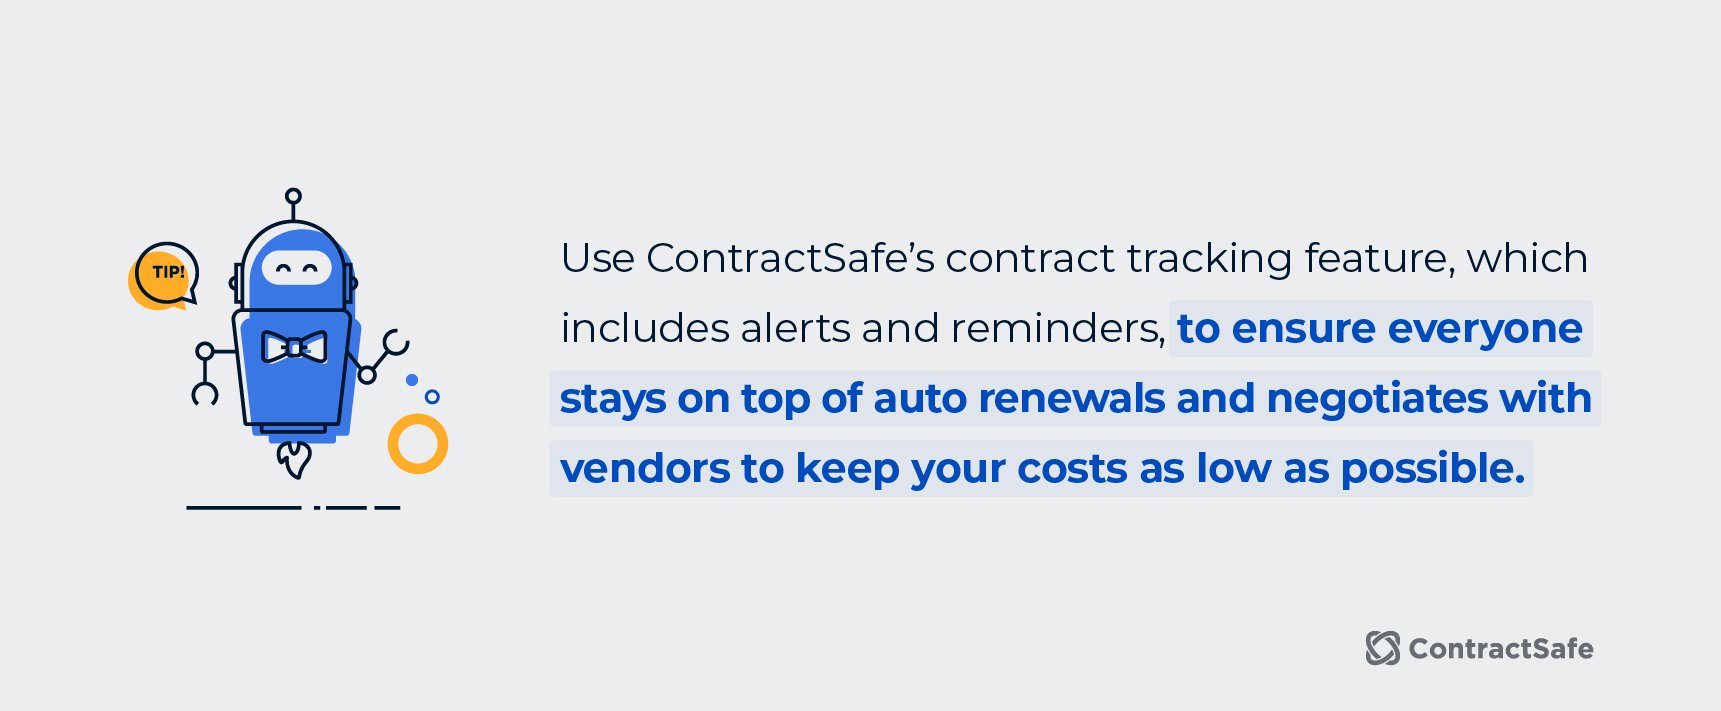 An robot illustration showcasing a prevention tip related to contract tracking through the use of alerts and reminders